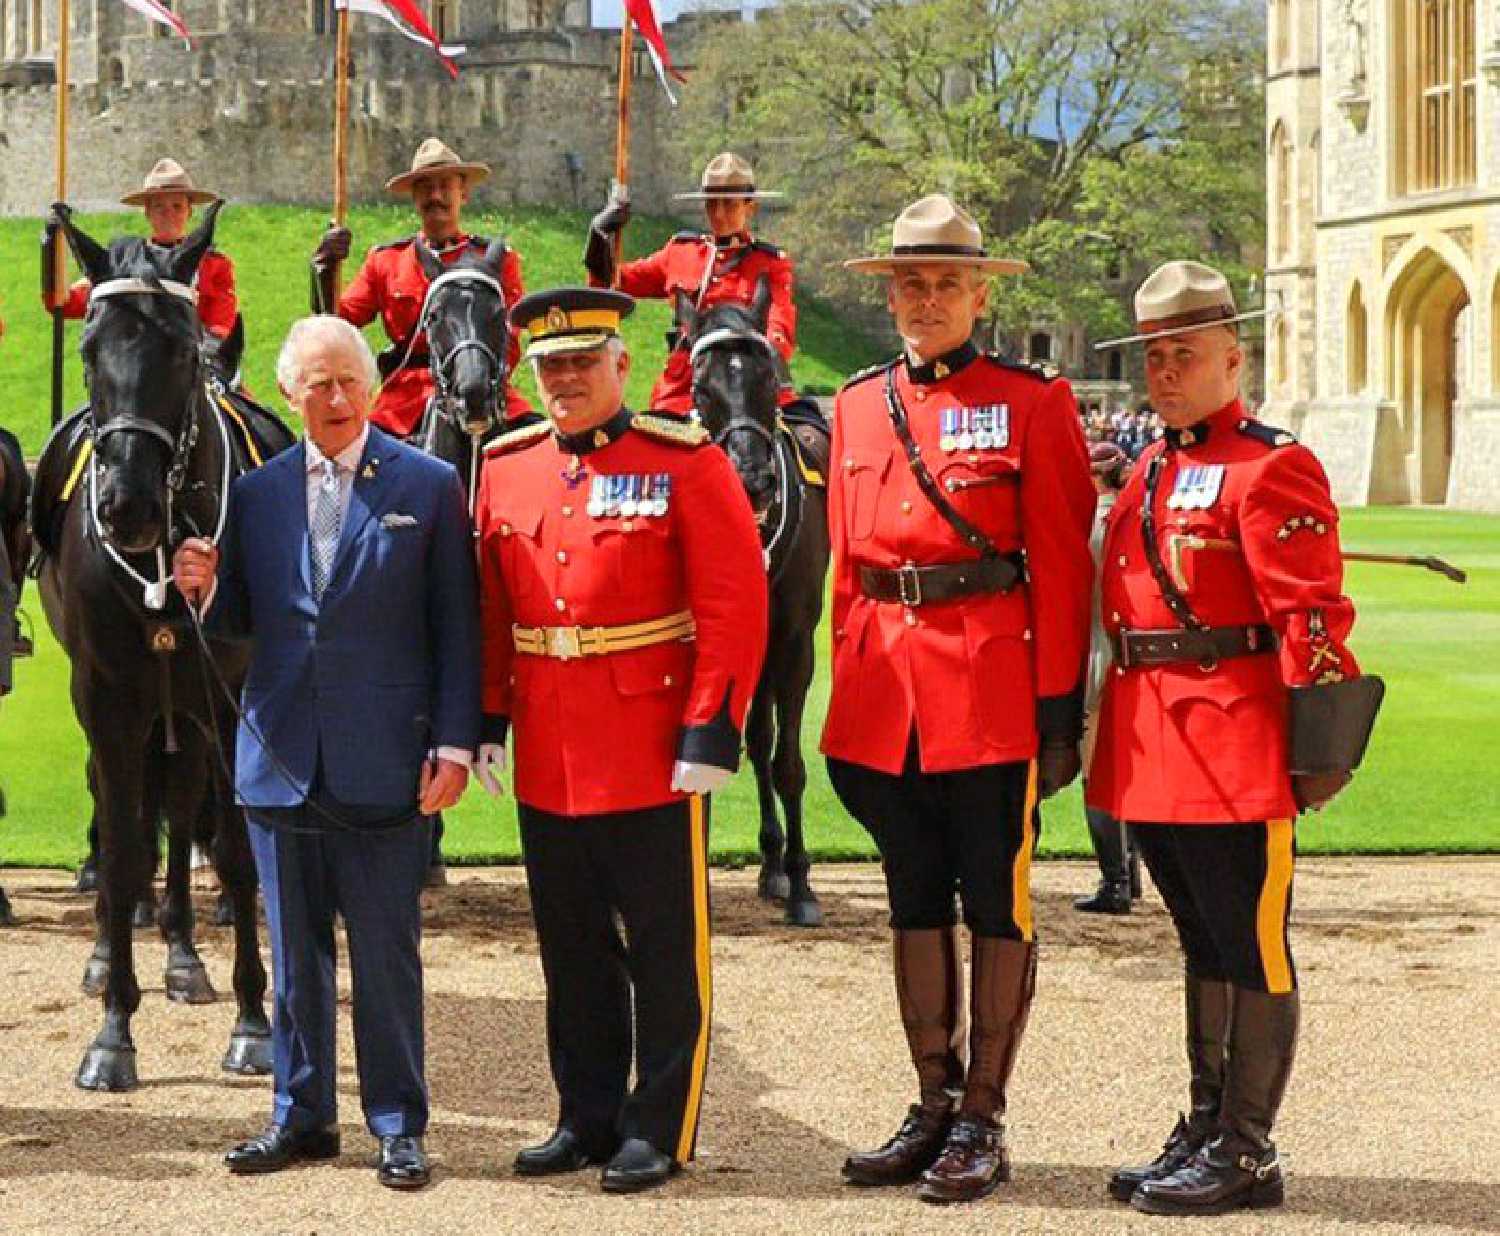 <b>Proud moment </b> Sergeant-Major Scott Williamson, at right, Riding Master for the RCMP Musical Ride, was part of the delegation that presented Noble, an RCMP-trained mare raised in Saskatchewan, to King Charles. Turn to page 21 for more on Williamson and the Coronation.